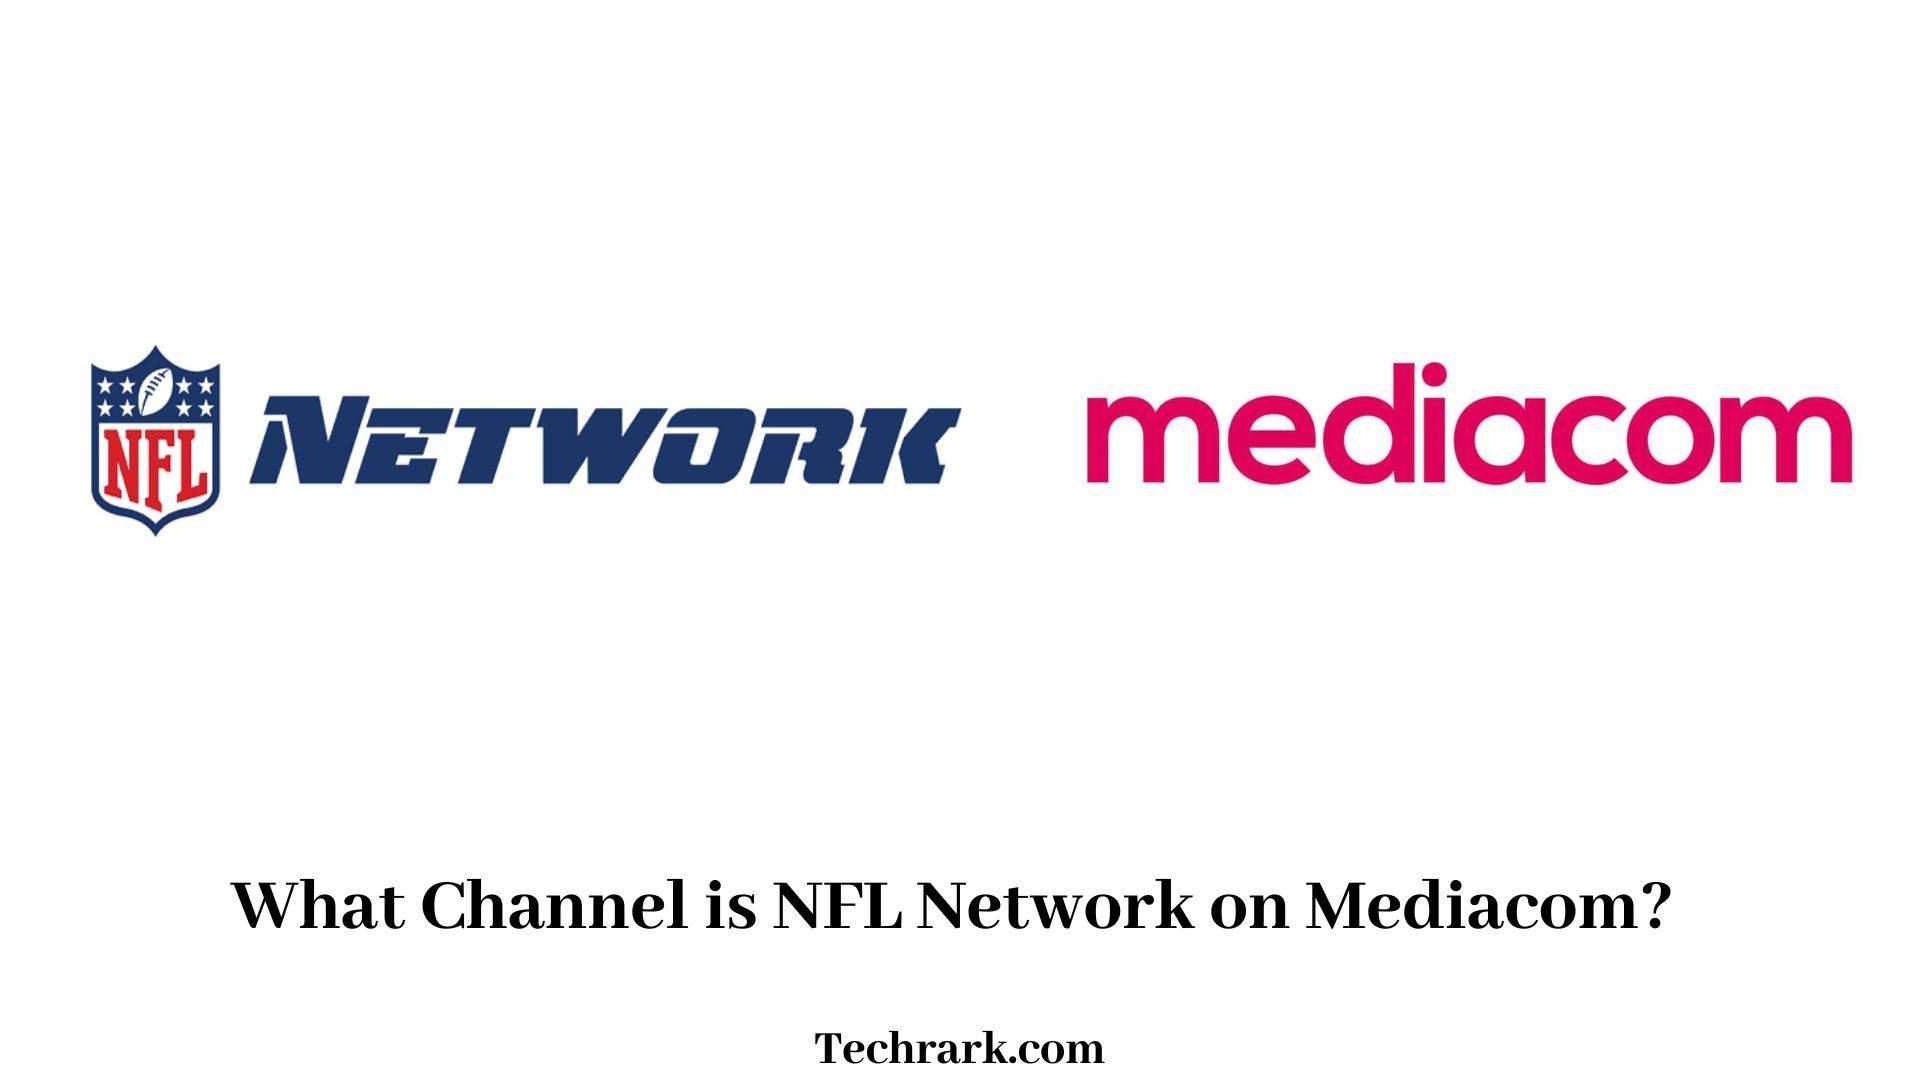 What Channel is NFL Network on Mediacom